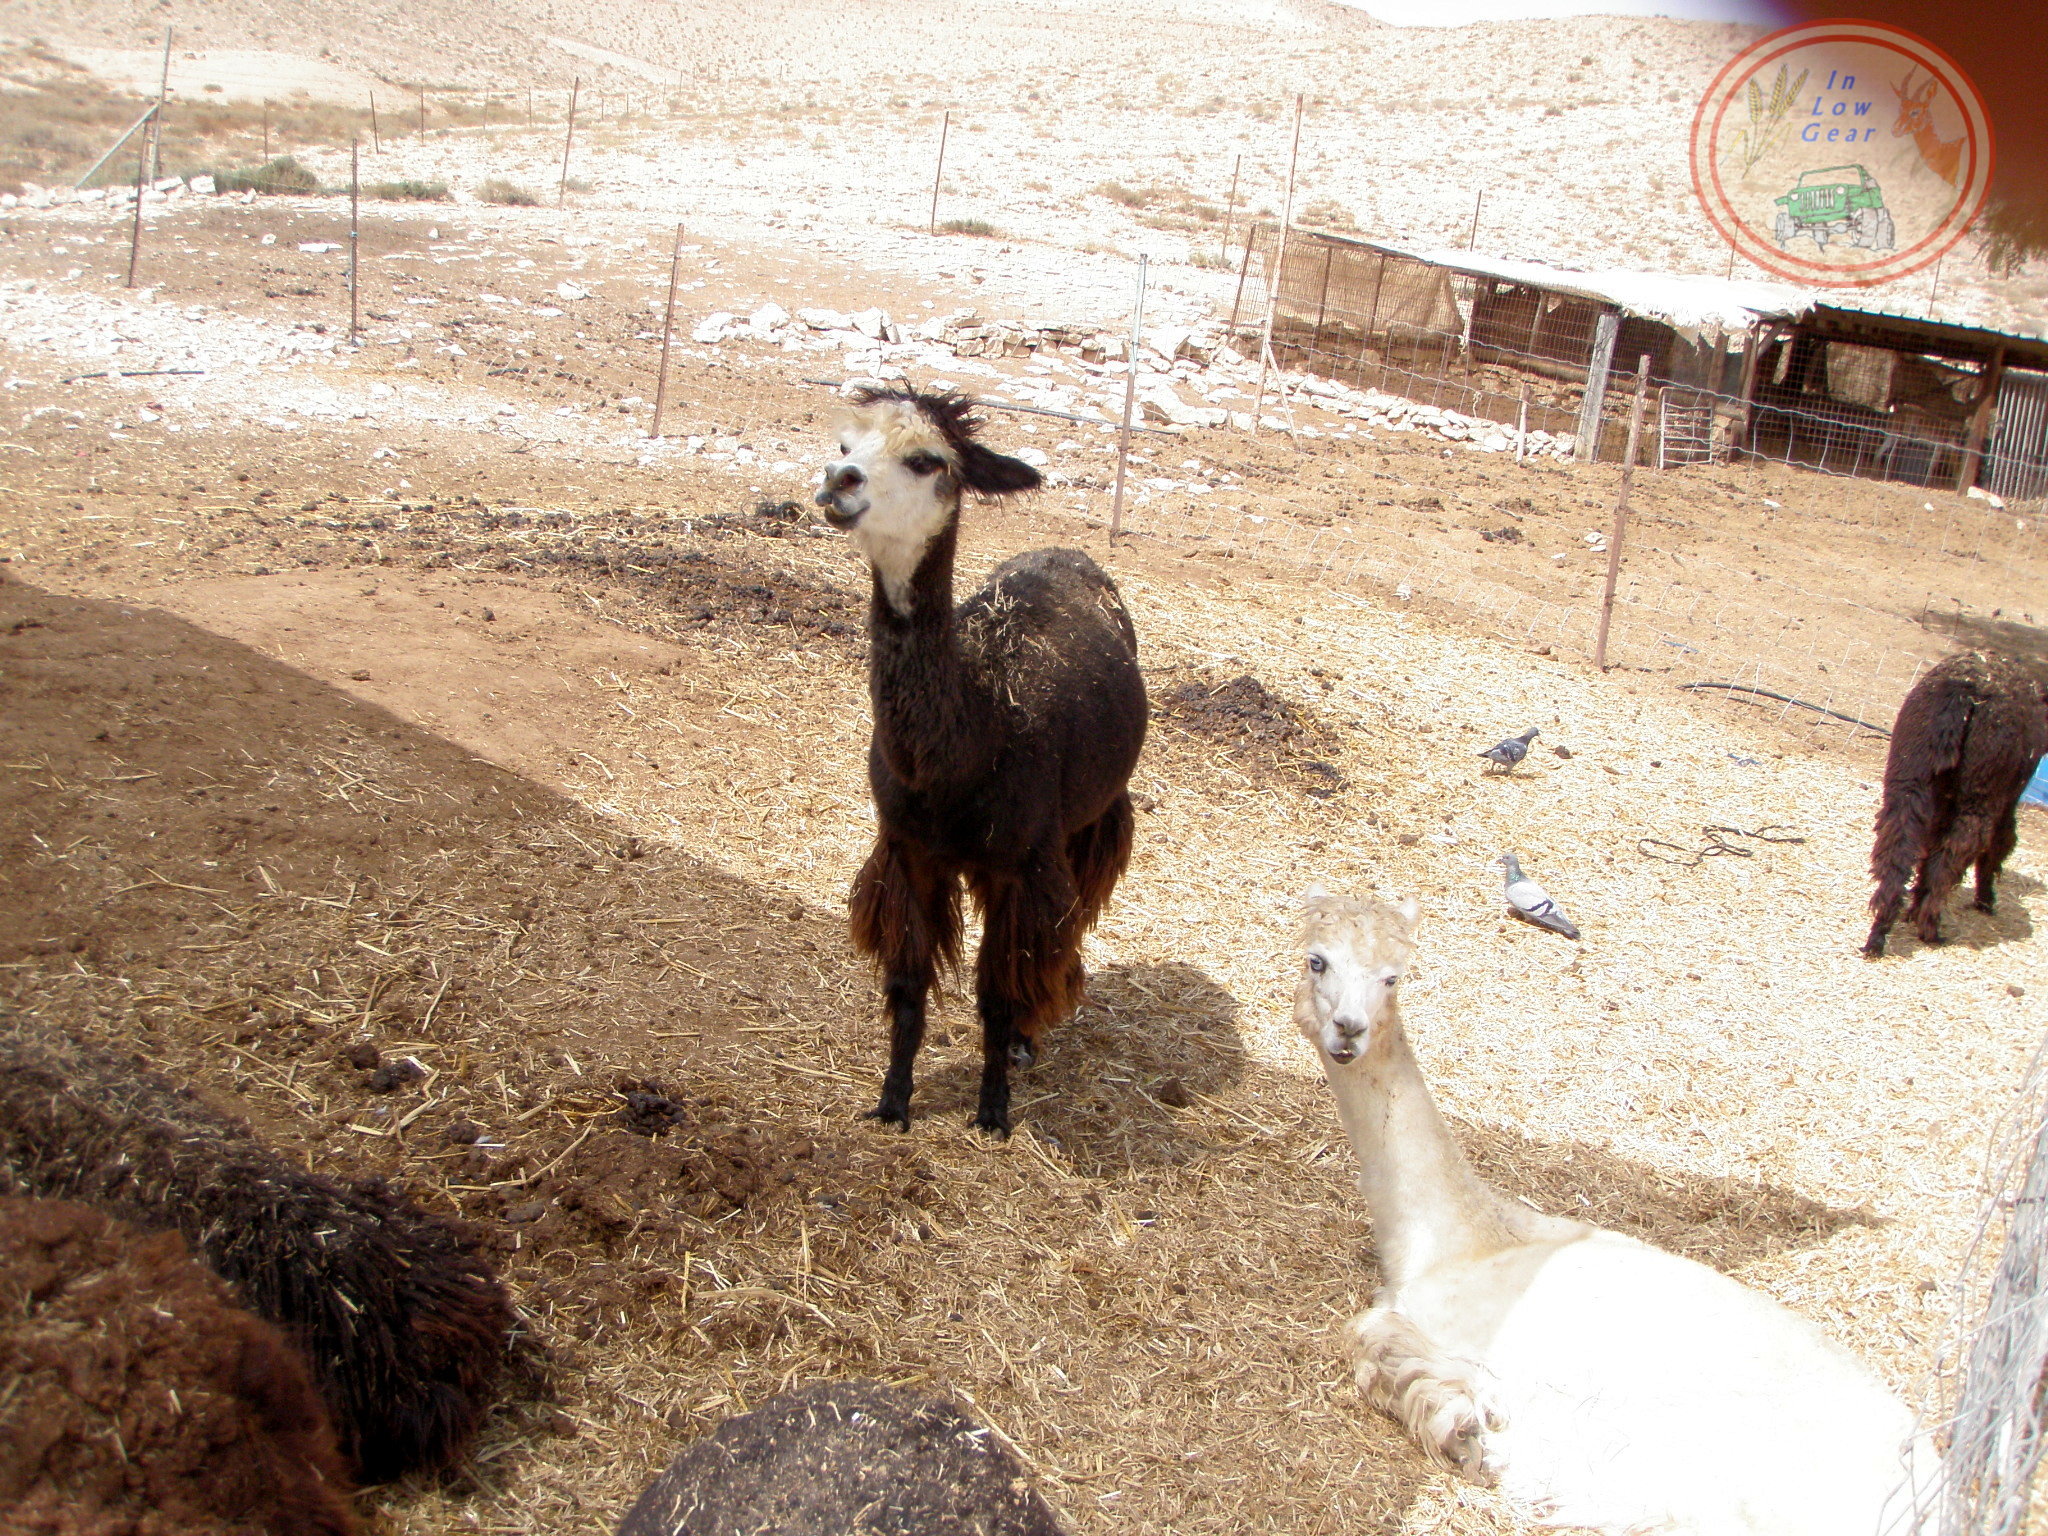 Mitzpe Ramon Alpaca ranch. Me and my girl.  "Did you say a party?"